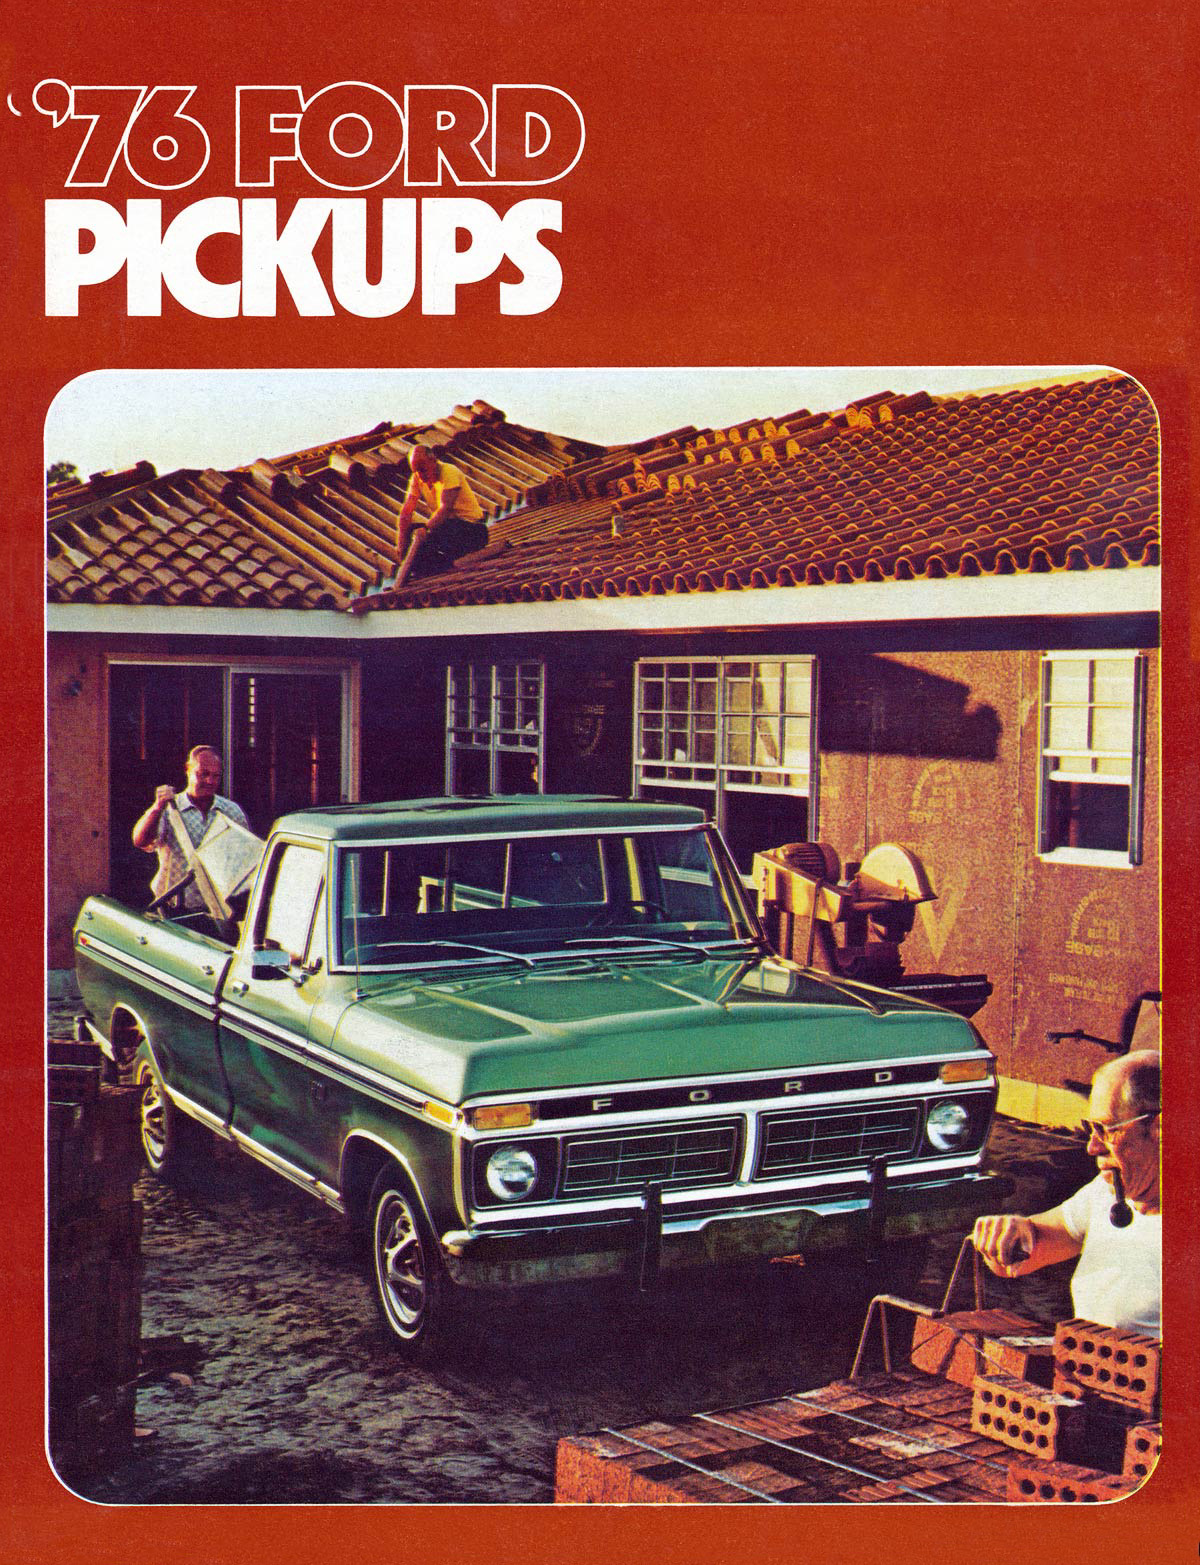 1976_Ford_Pickups-01